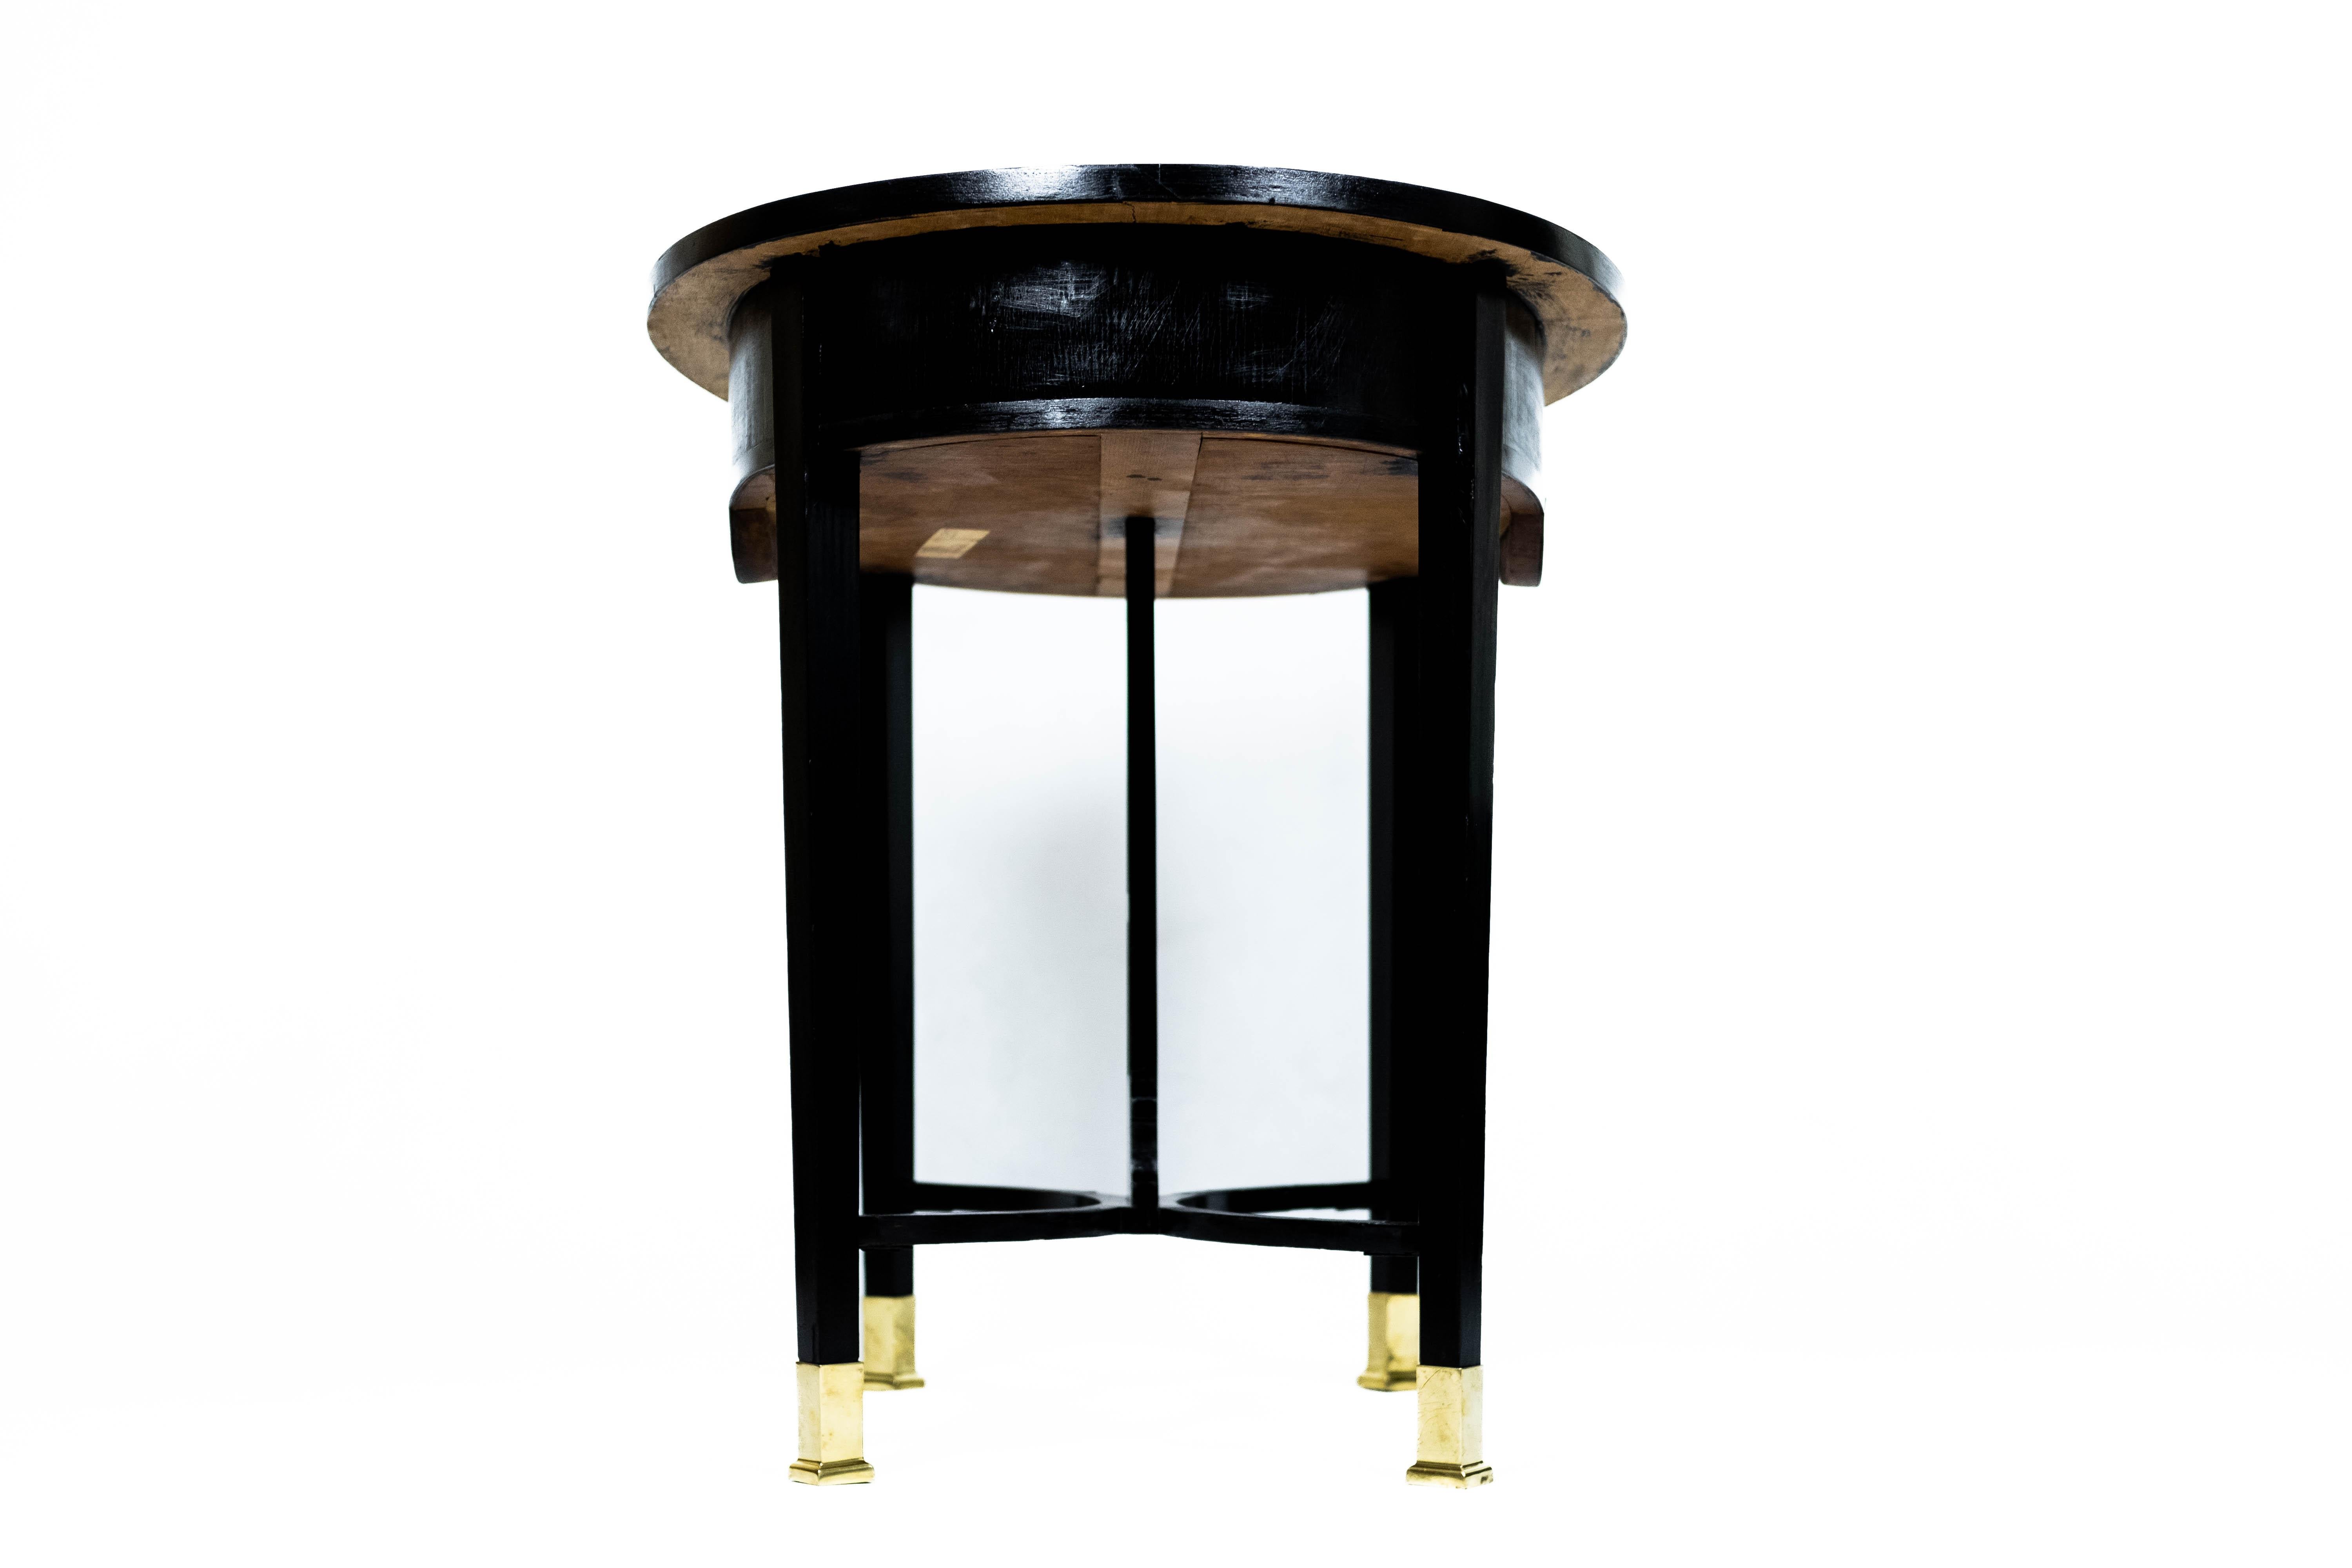 Small black Art Nouveau Table with Marble-Plate and Brass-Fittings (circa 1910) For Sale 7